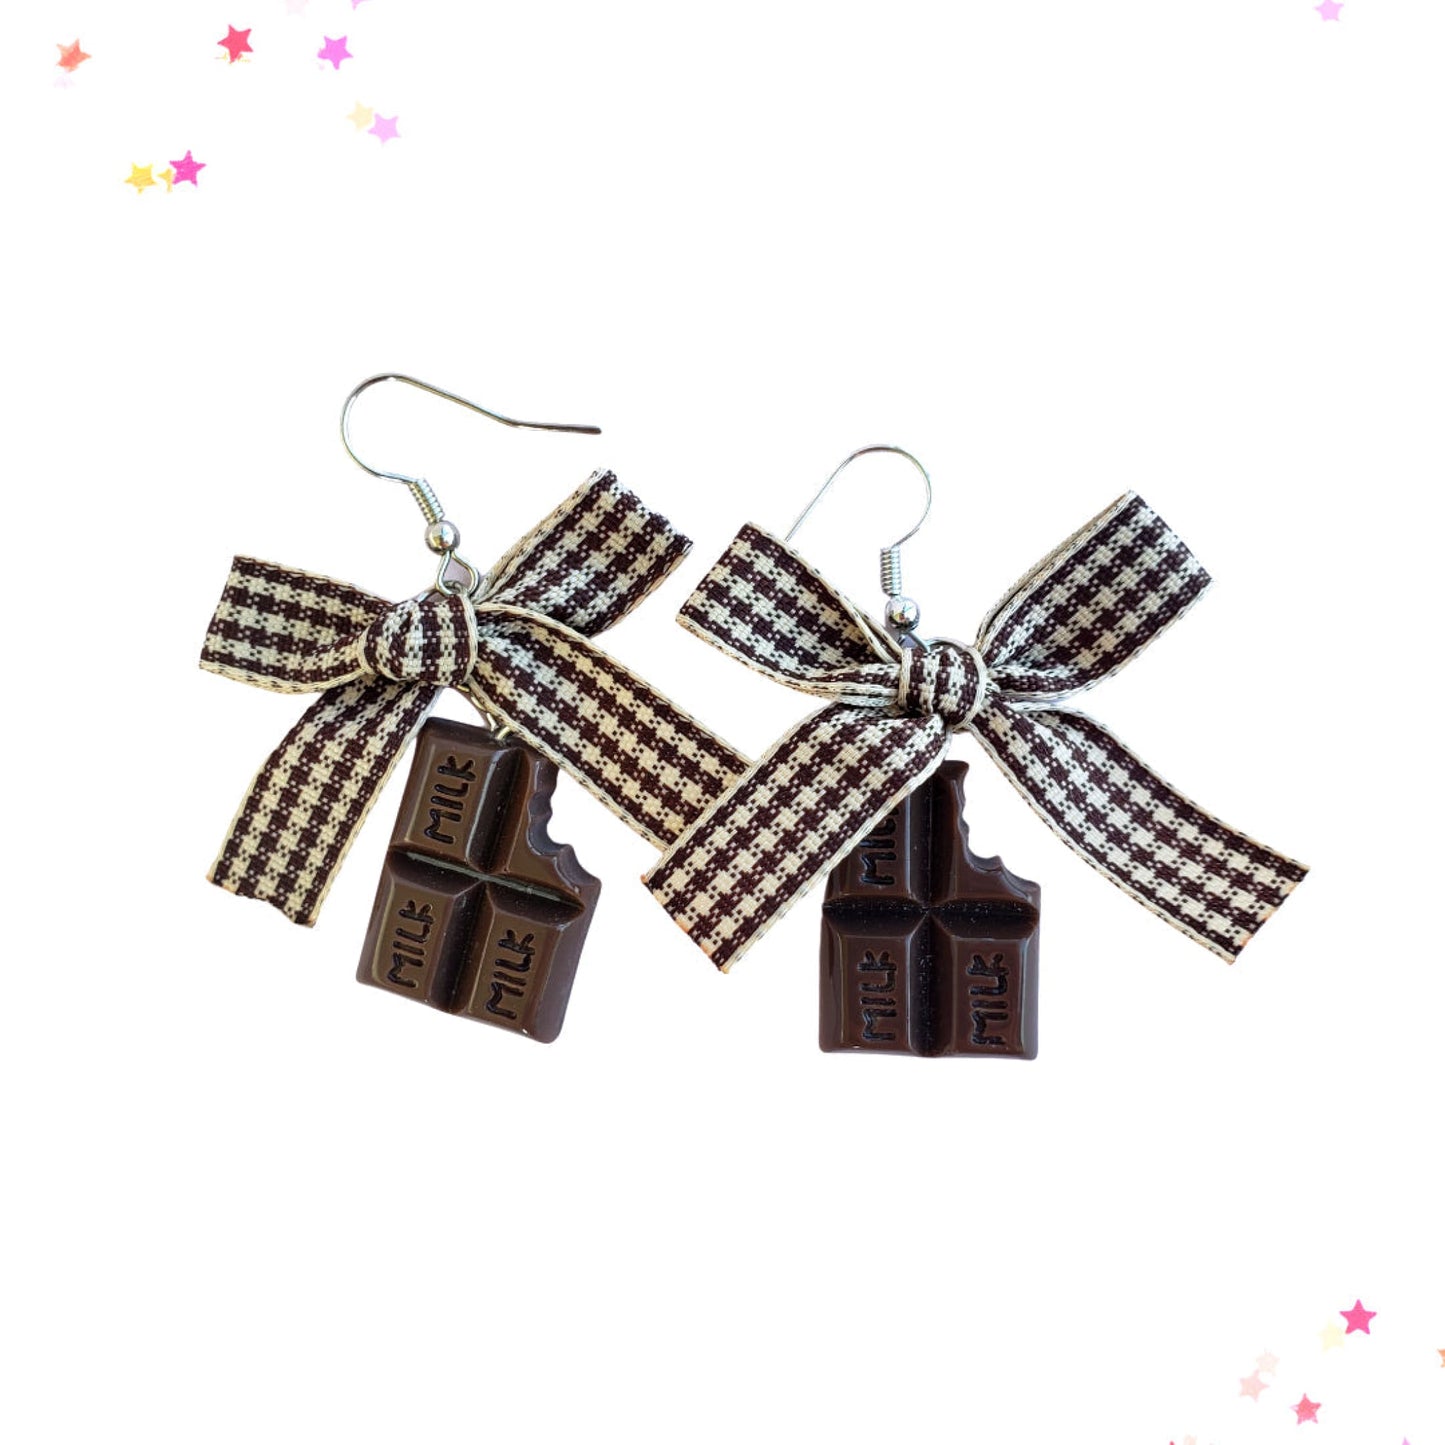 Belgian Chocolate Bar Dangle Earrings from Confetti Kitty, Only 7.99